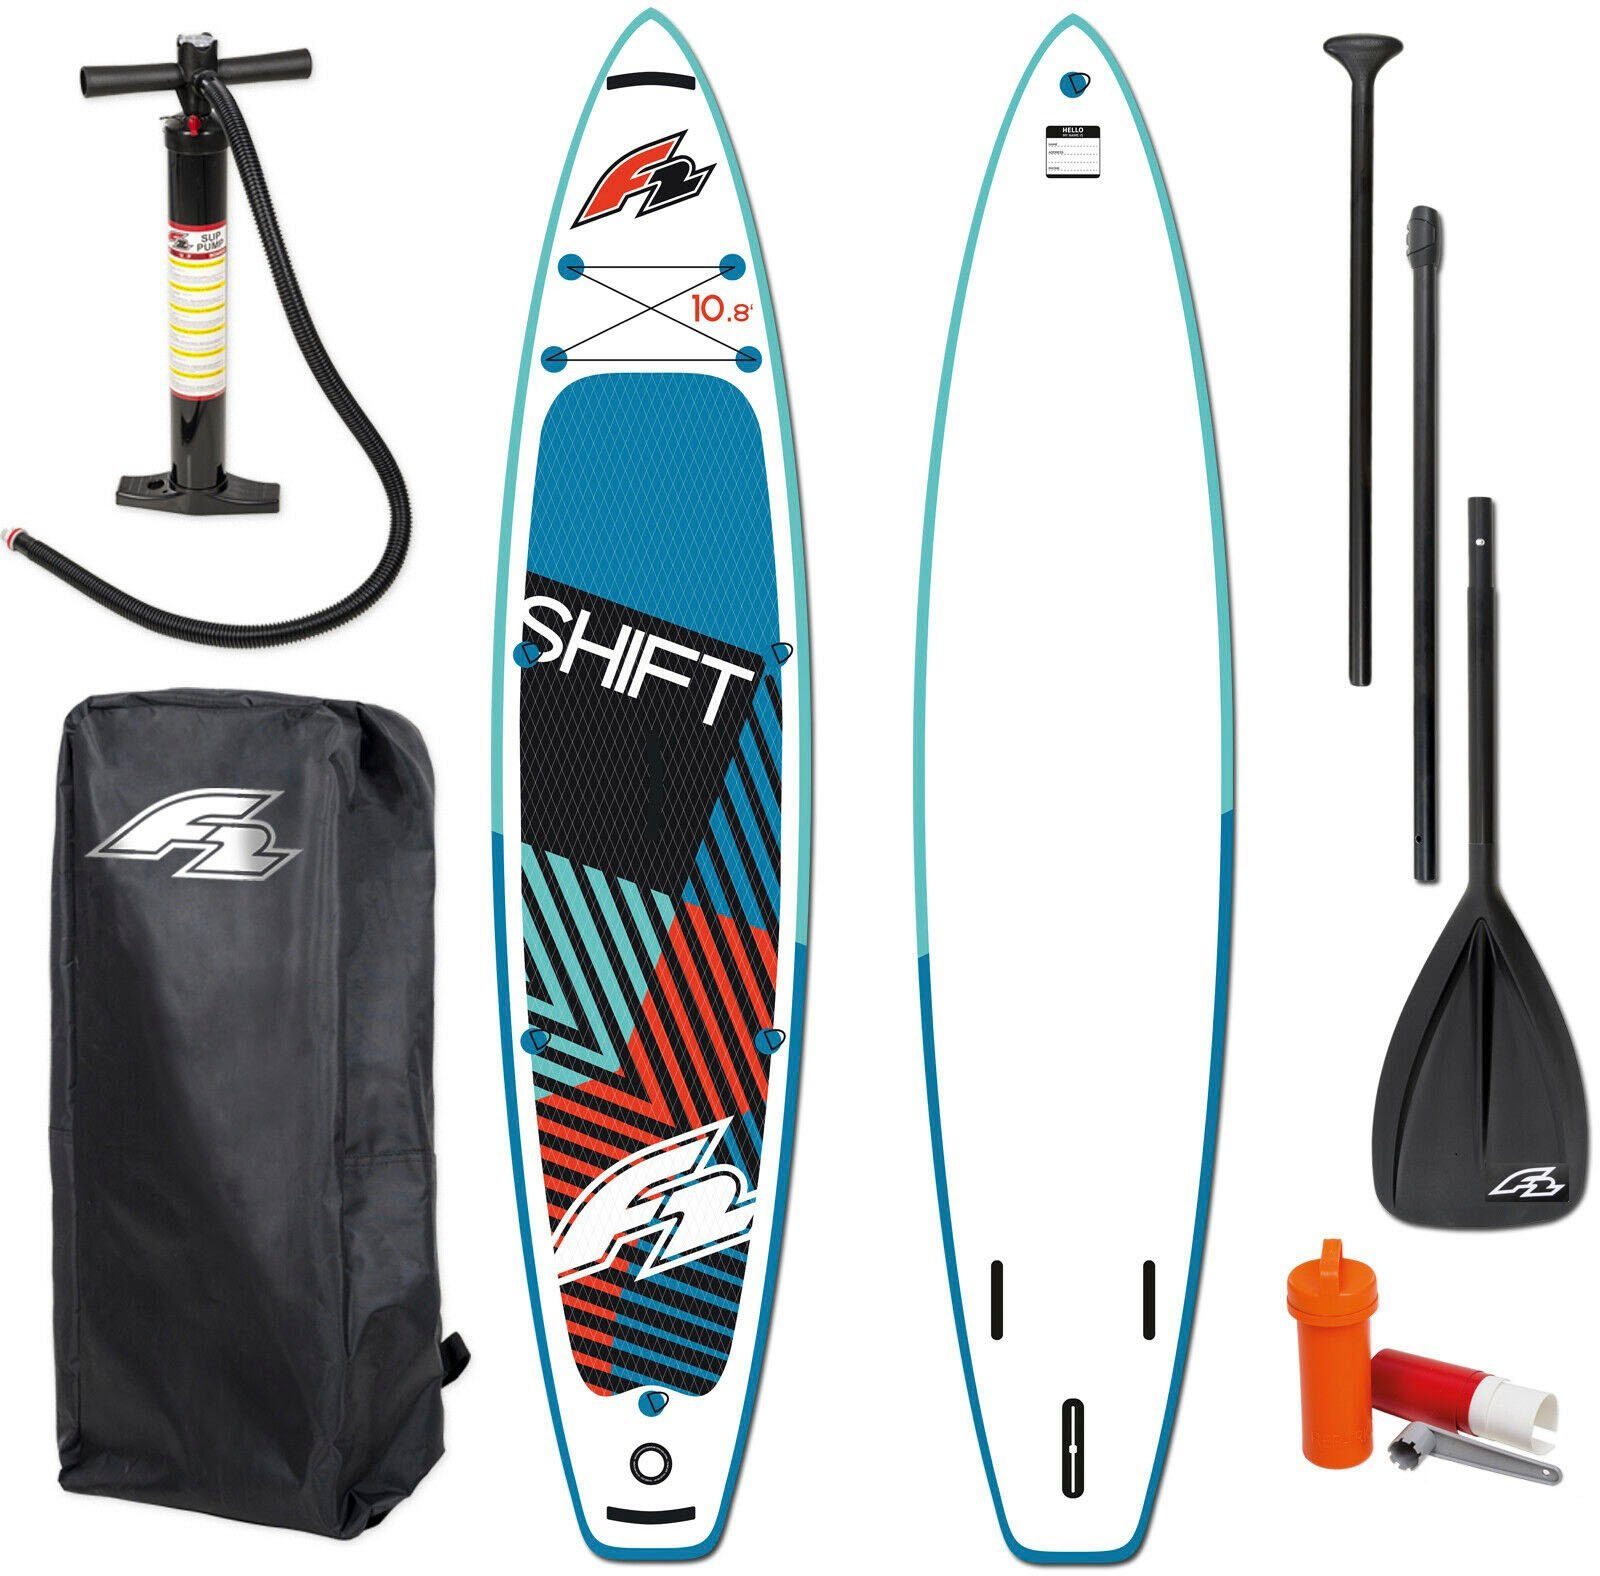 SUP-Board (Packung, 5 tlg) 10,8, F2 Inflatable Shift